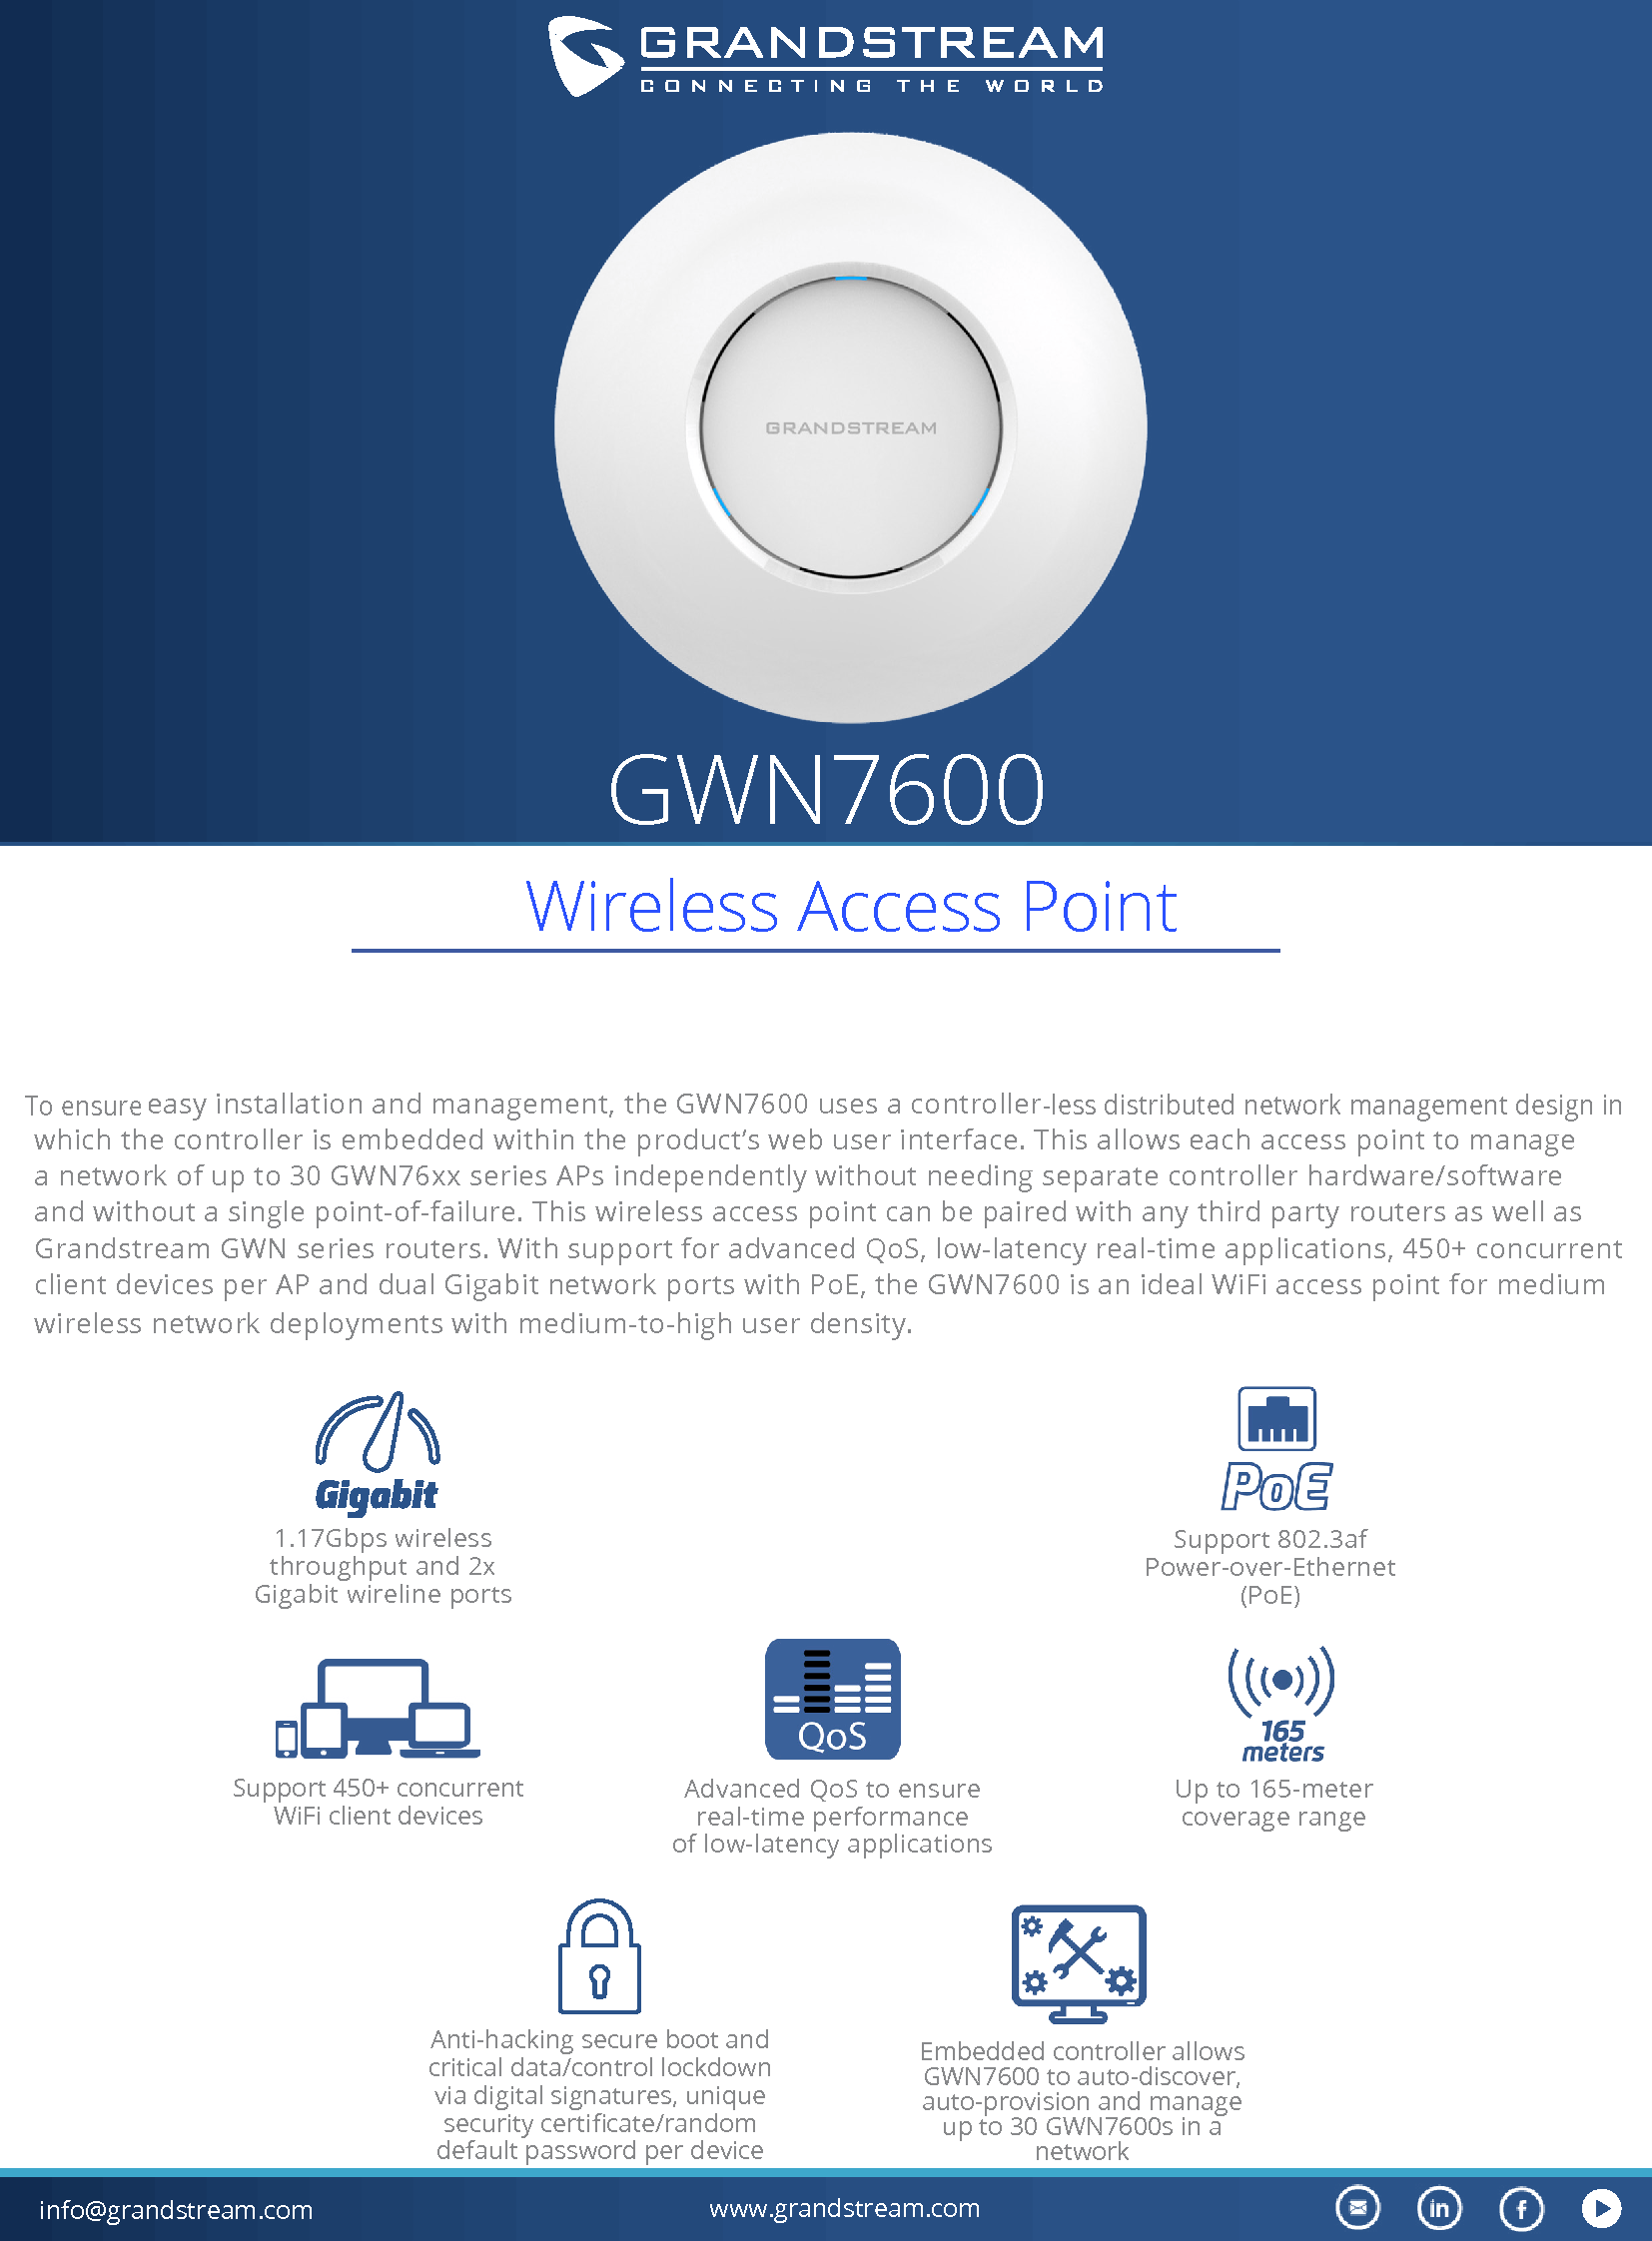 info@grandstream.com www.grandstream.comGWN7600 To ensure easy installation and management, the GWN7600 uses a controller-less distributed network management design in which the controller is embedded within the product’s web user interface. This allows each access point to manage a network of up to 30 GWN76xx series APs independently without needing separate controller hardware/software and without a single point-of-failure. This wireless access point can be paired with any third party routers as well as Grandstream GWN series routers. With support for advanced QoS, low-latency real-time applications, 450+ concurrent client devices per AP and dual Gigabit network ports with PoE, the GWN7600 is an ideal WiFi access point for medium wireless network deployments with medium-to-high user density.1.17Gbps wireless throughput and 2x Gigabit wireline portsUp to 165-meter coverage rangeSupport 450+ concurrent WiFi client devicesSupport 802.3af Power-over-Ethernet (PoE) Anti-hacking secure boot and critical data/control lockdown via digital signatures, unique security certicate/random default password per deviceAdvanced QoS to ensure real-time performanceof low-latency applicationsEmbedded controller allows GWN7600 to auto-discover, auto-provision and manage up to 30 GWN7600s in a network Wireless Access Point